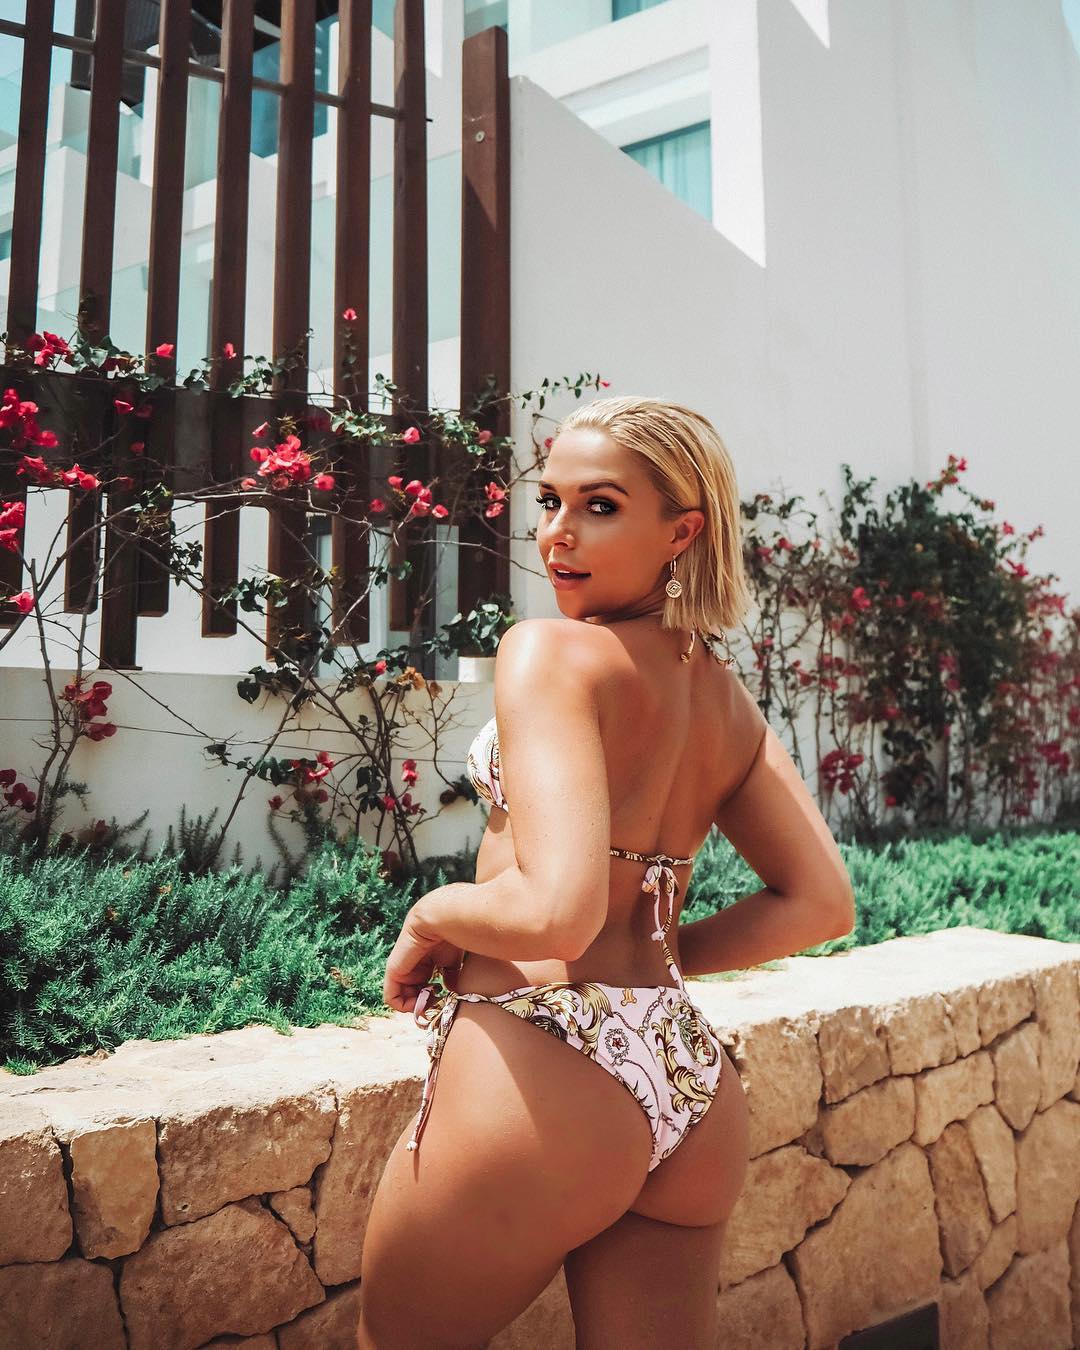 49 Hot Pictures Of Gabby Allen Which Expose Her Sexy Hour- glass Figure | Best Of Comic Books